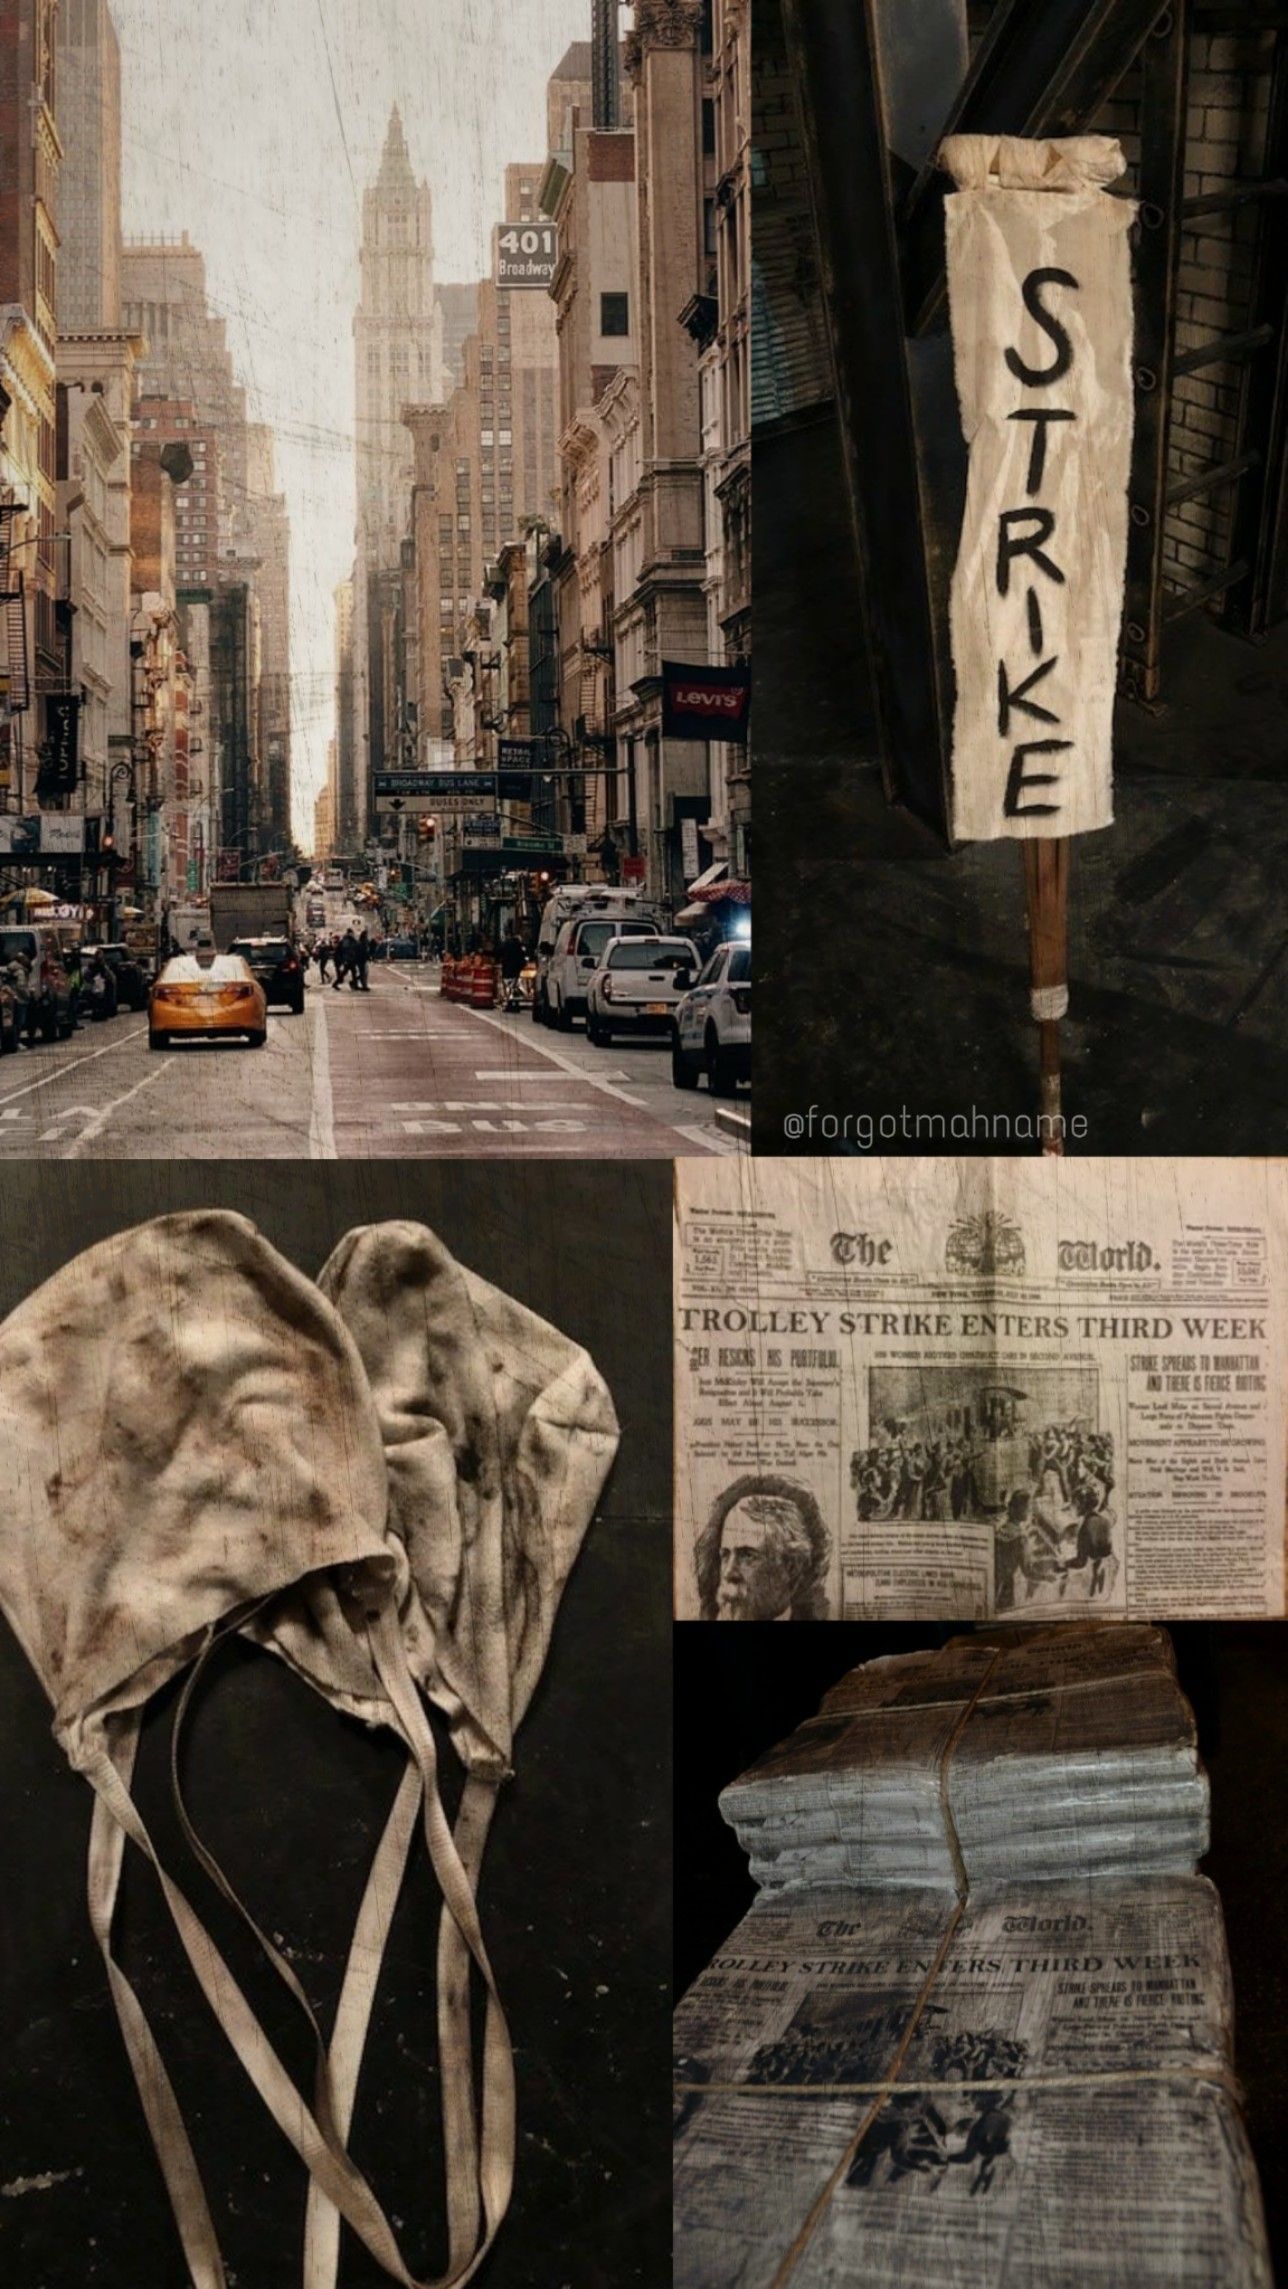 A collage of images including a trolley strike banner, newspaper articles, and a photo of a city street. - Broadway